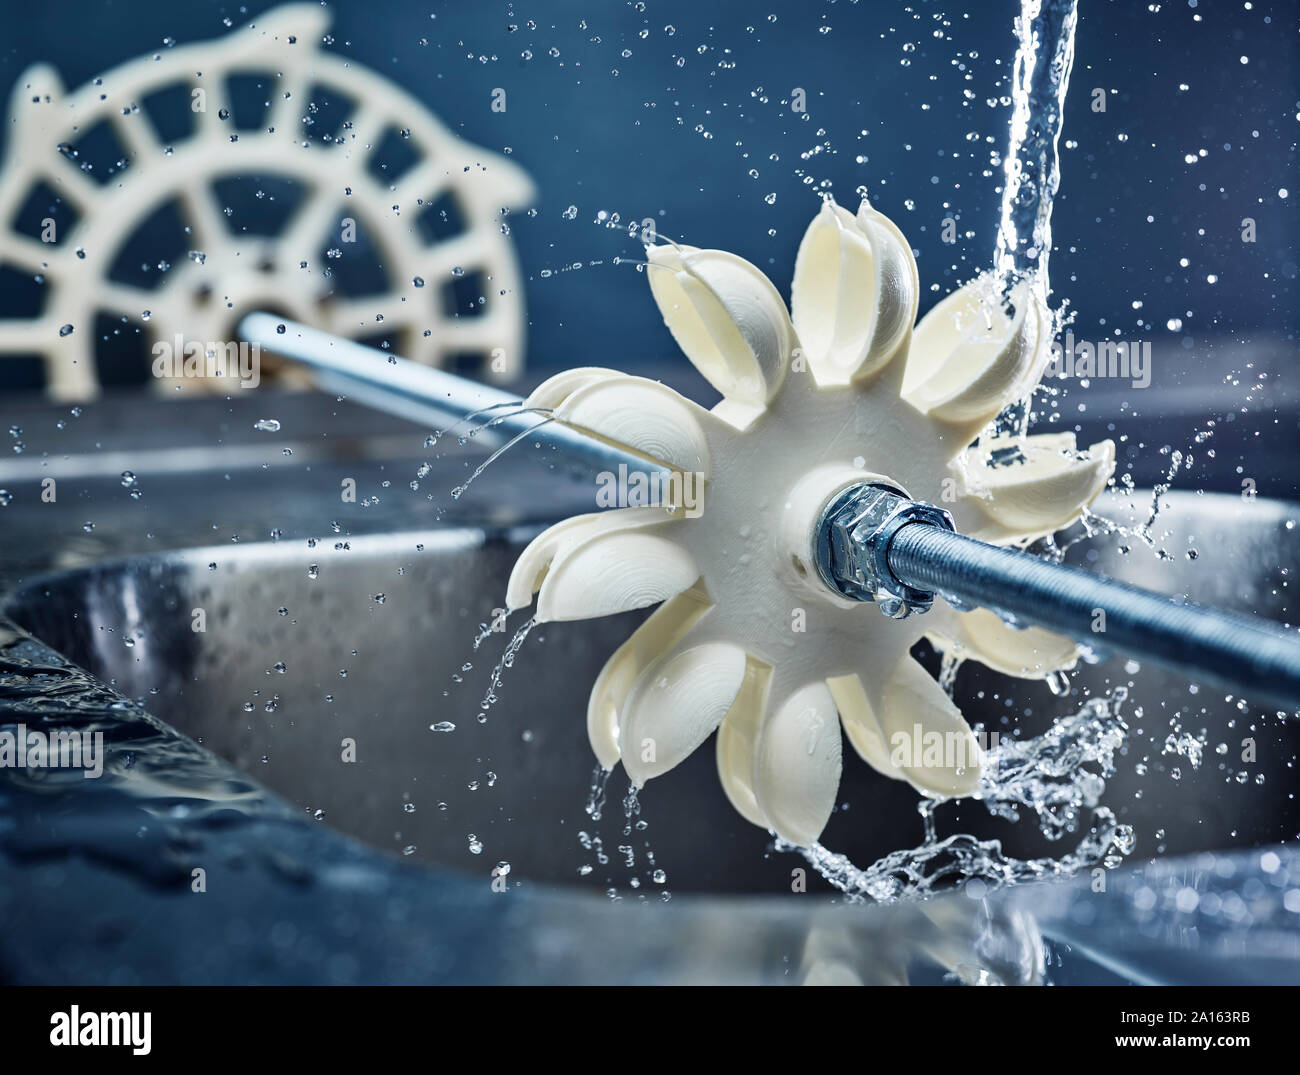 Turbine wheel being tested for power generation Stock Photo